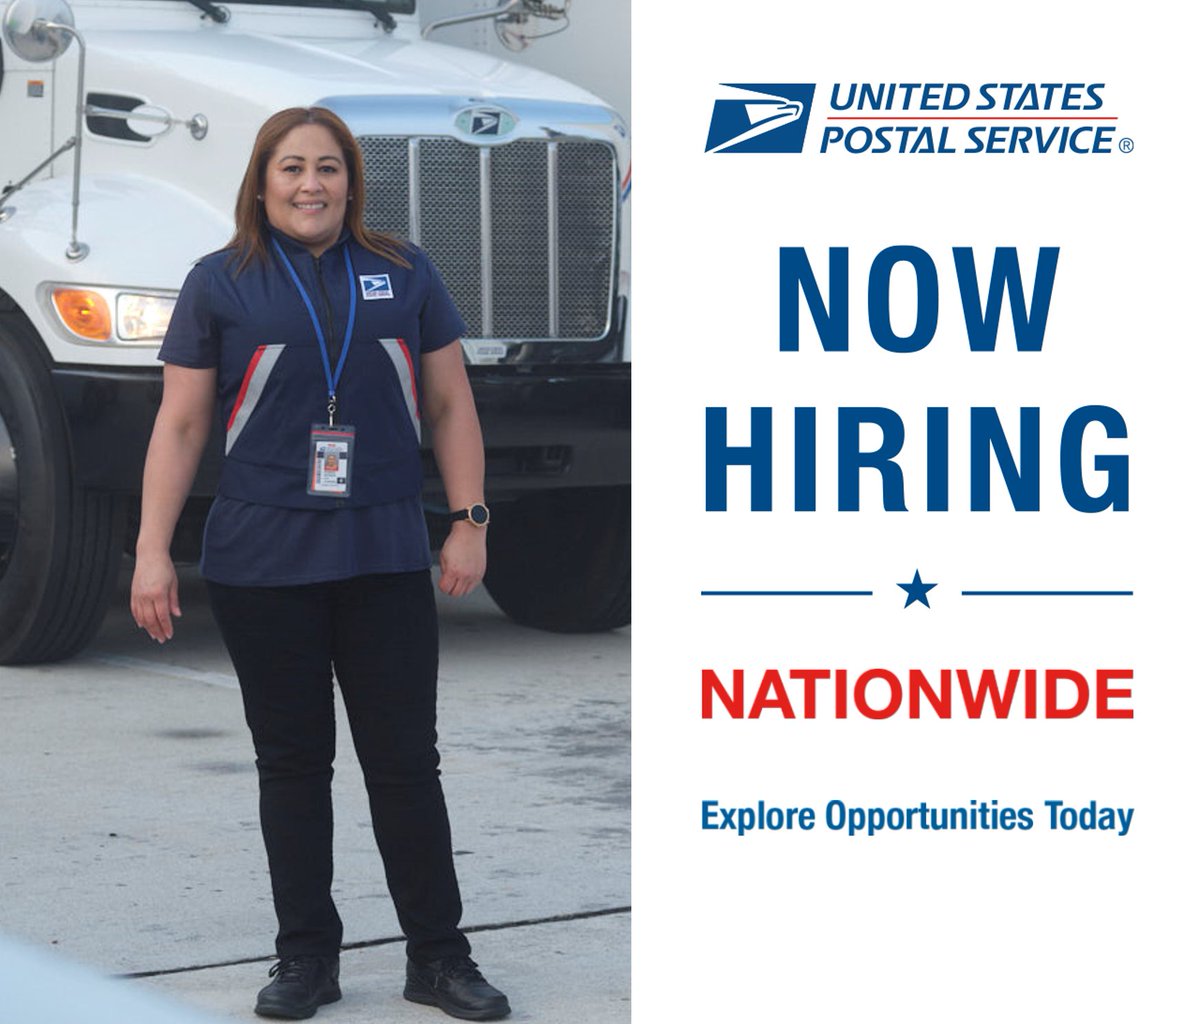 The United States Postal Service is actively recruiting for many positions that may be perfect for you. Whether full time, part time or seasonal positions, we have options available: b.link/usps-careers And for tips on where and how to apply: b.link/applyforauspsj…